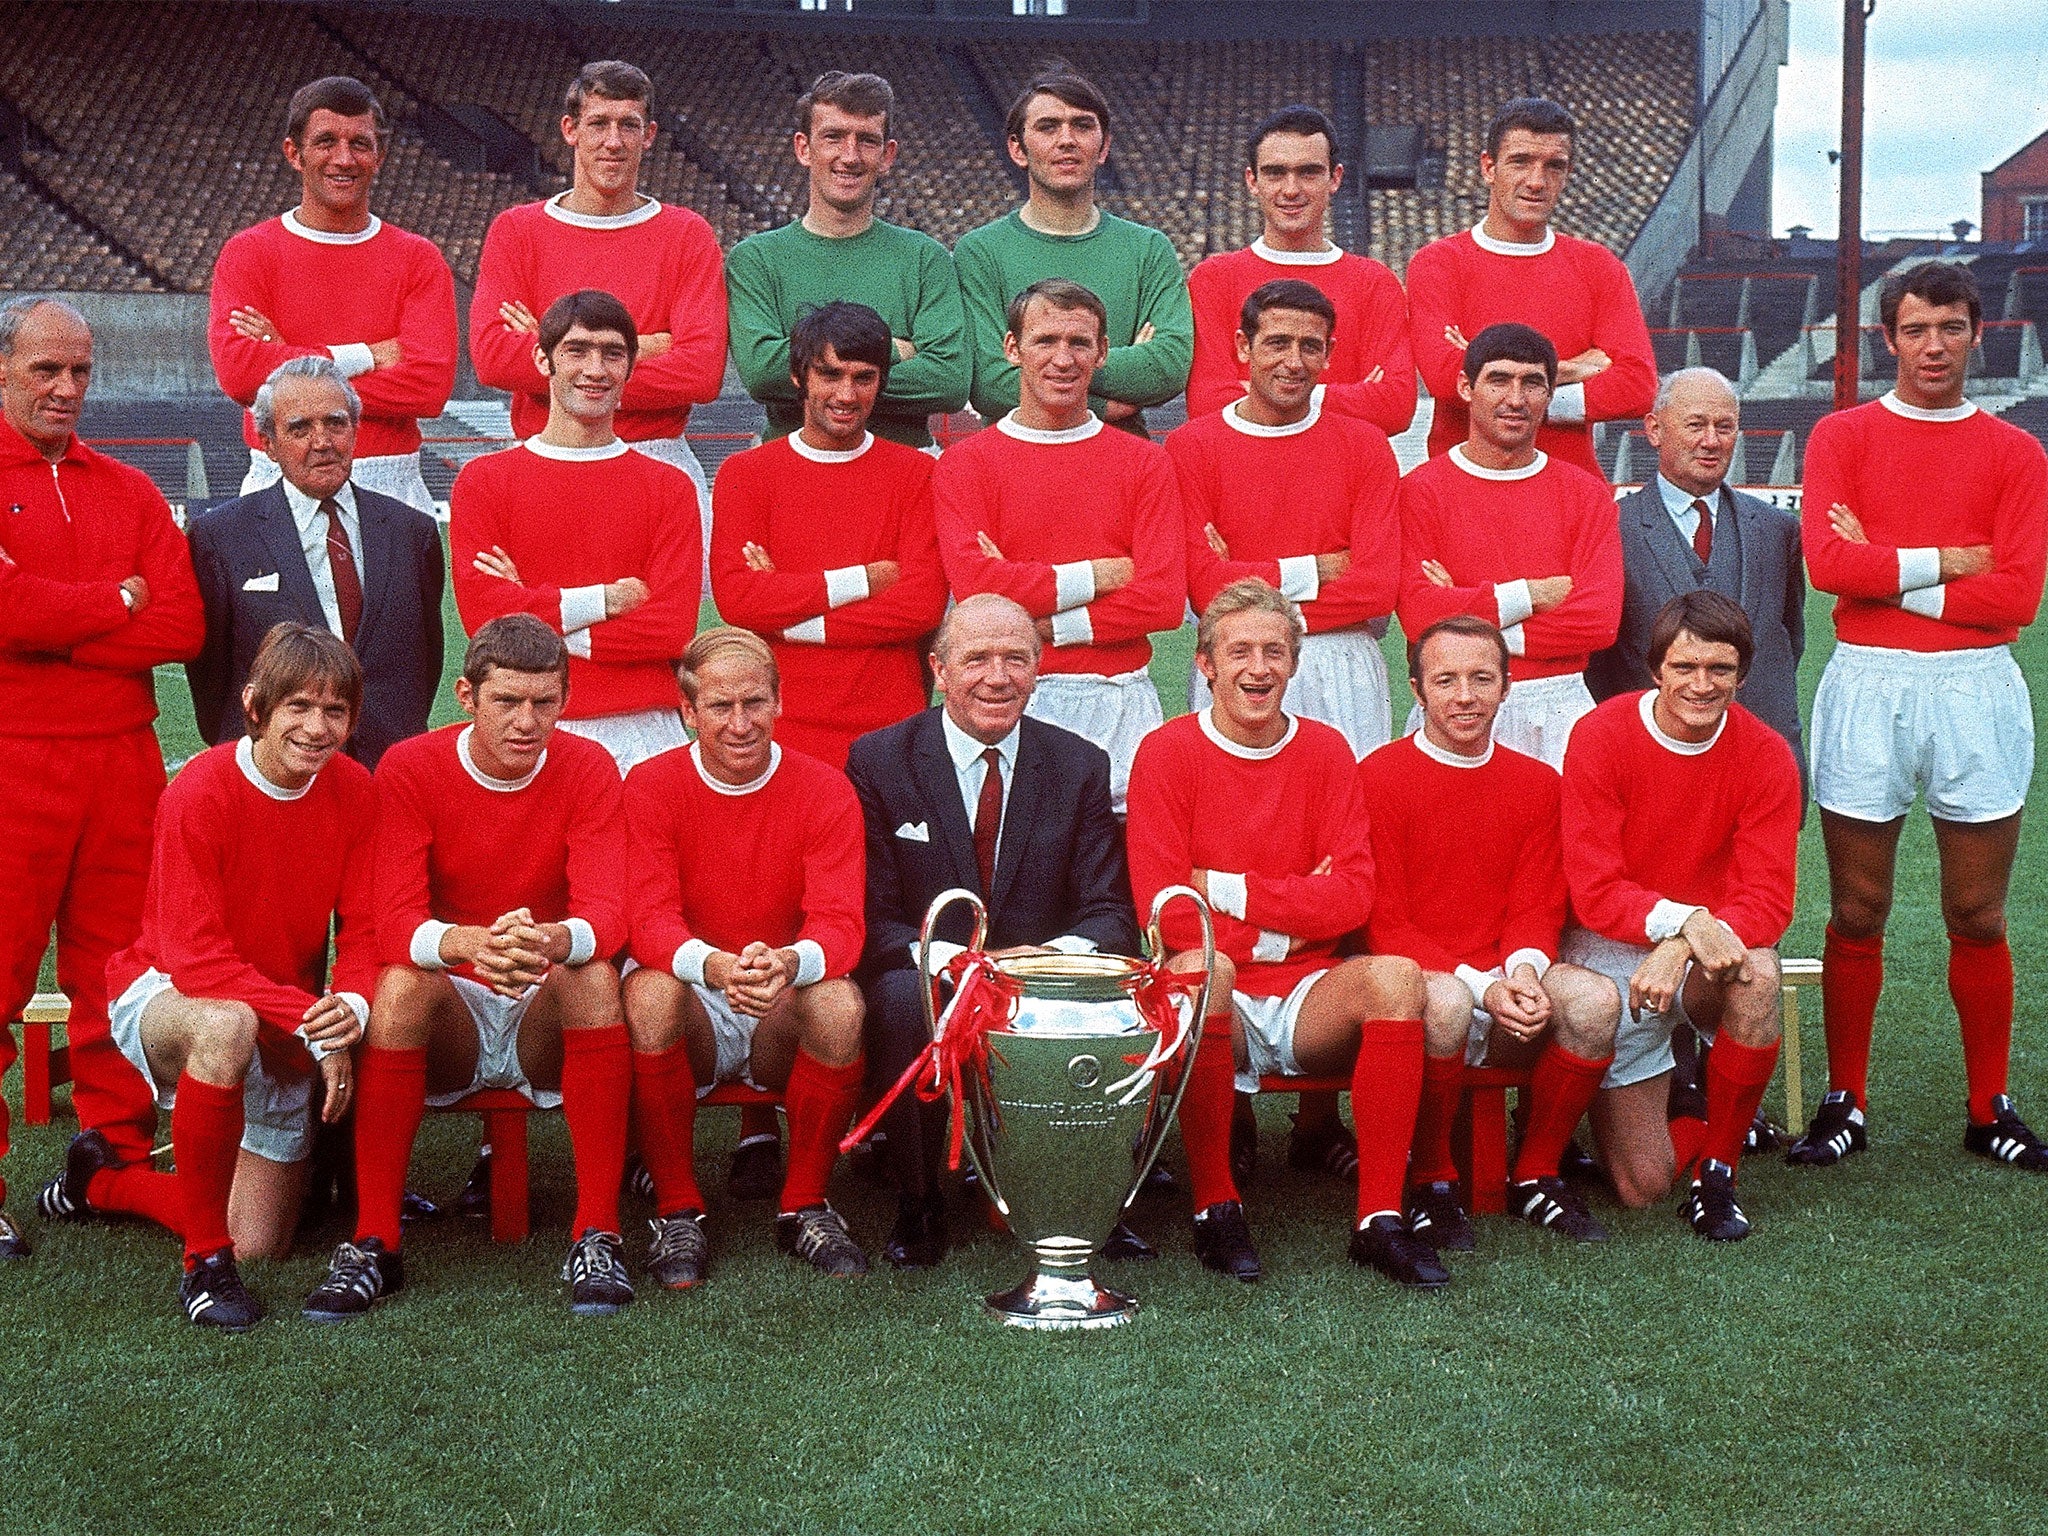 Manchester United's European Cup winners were historically great